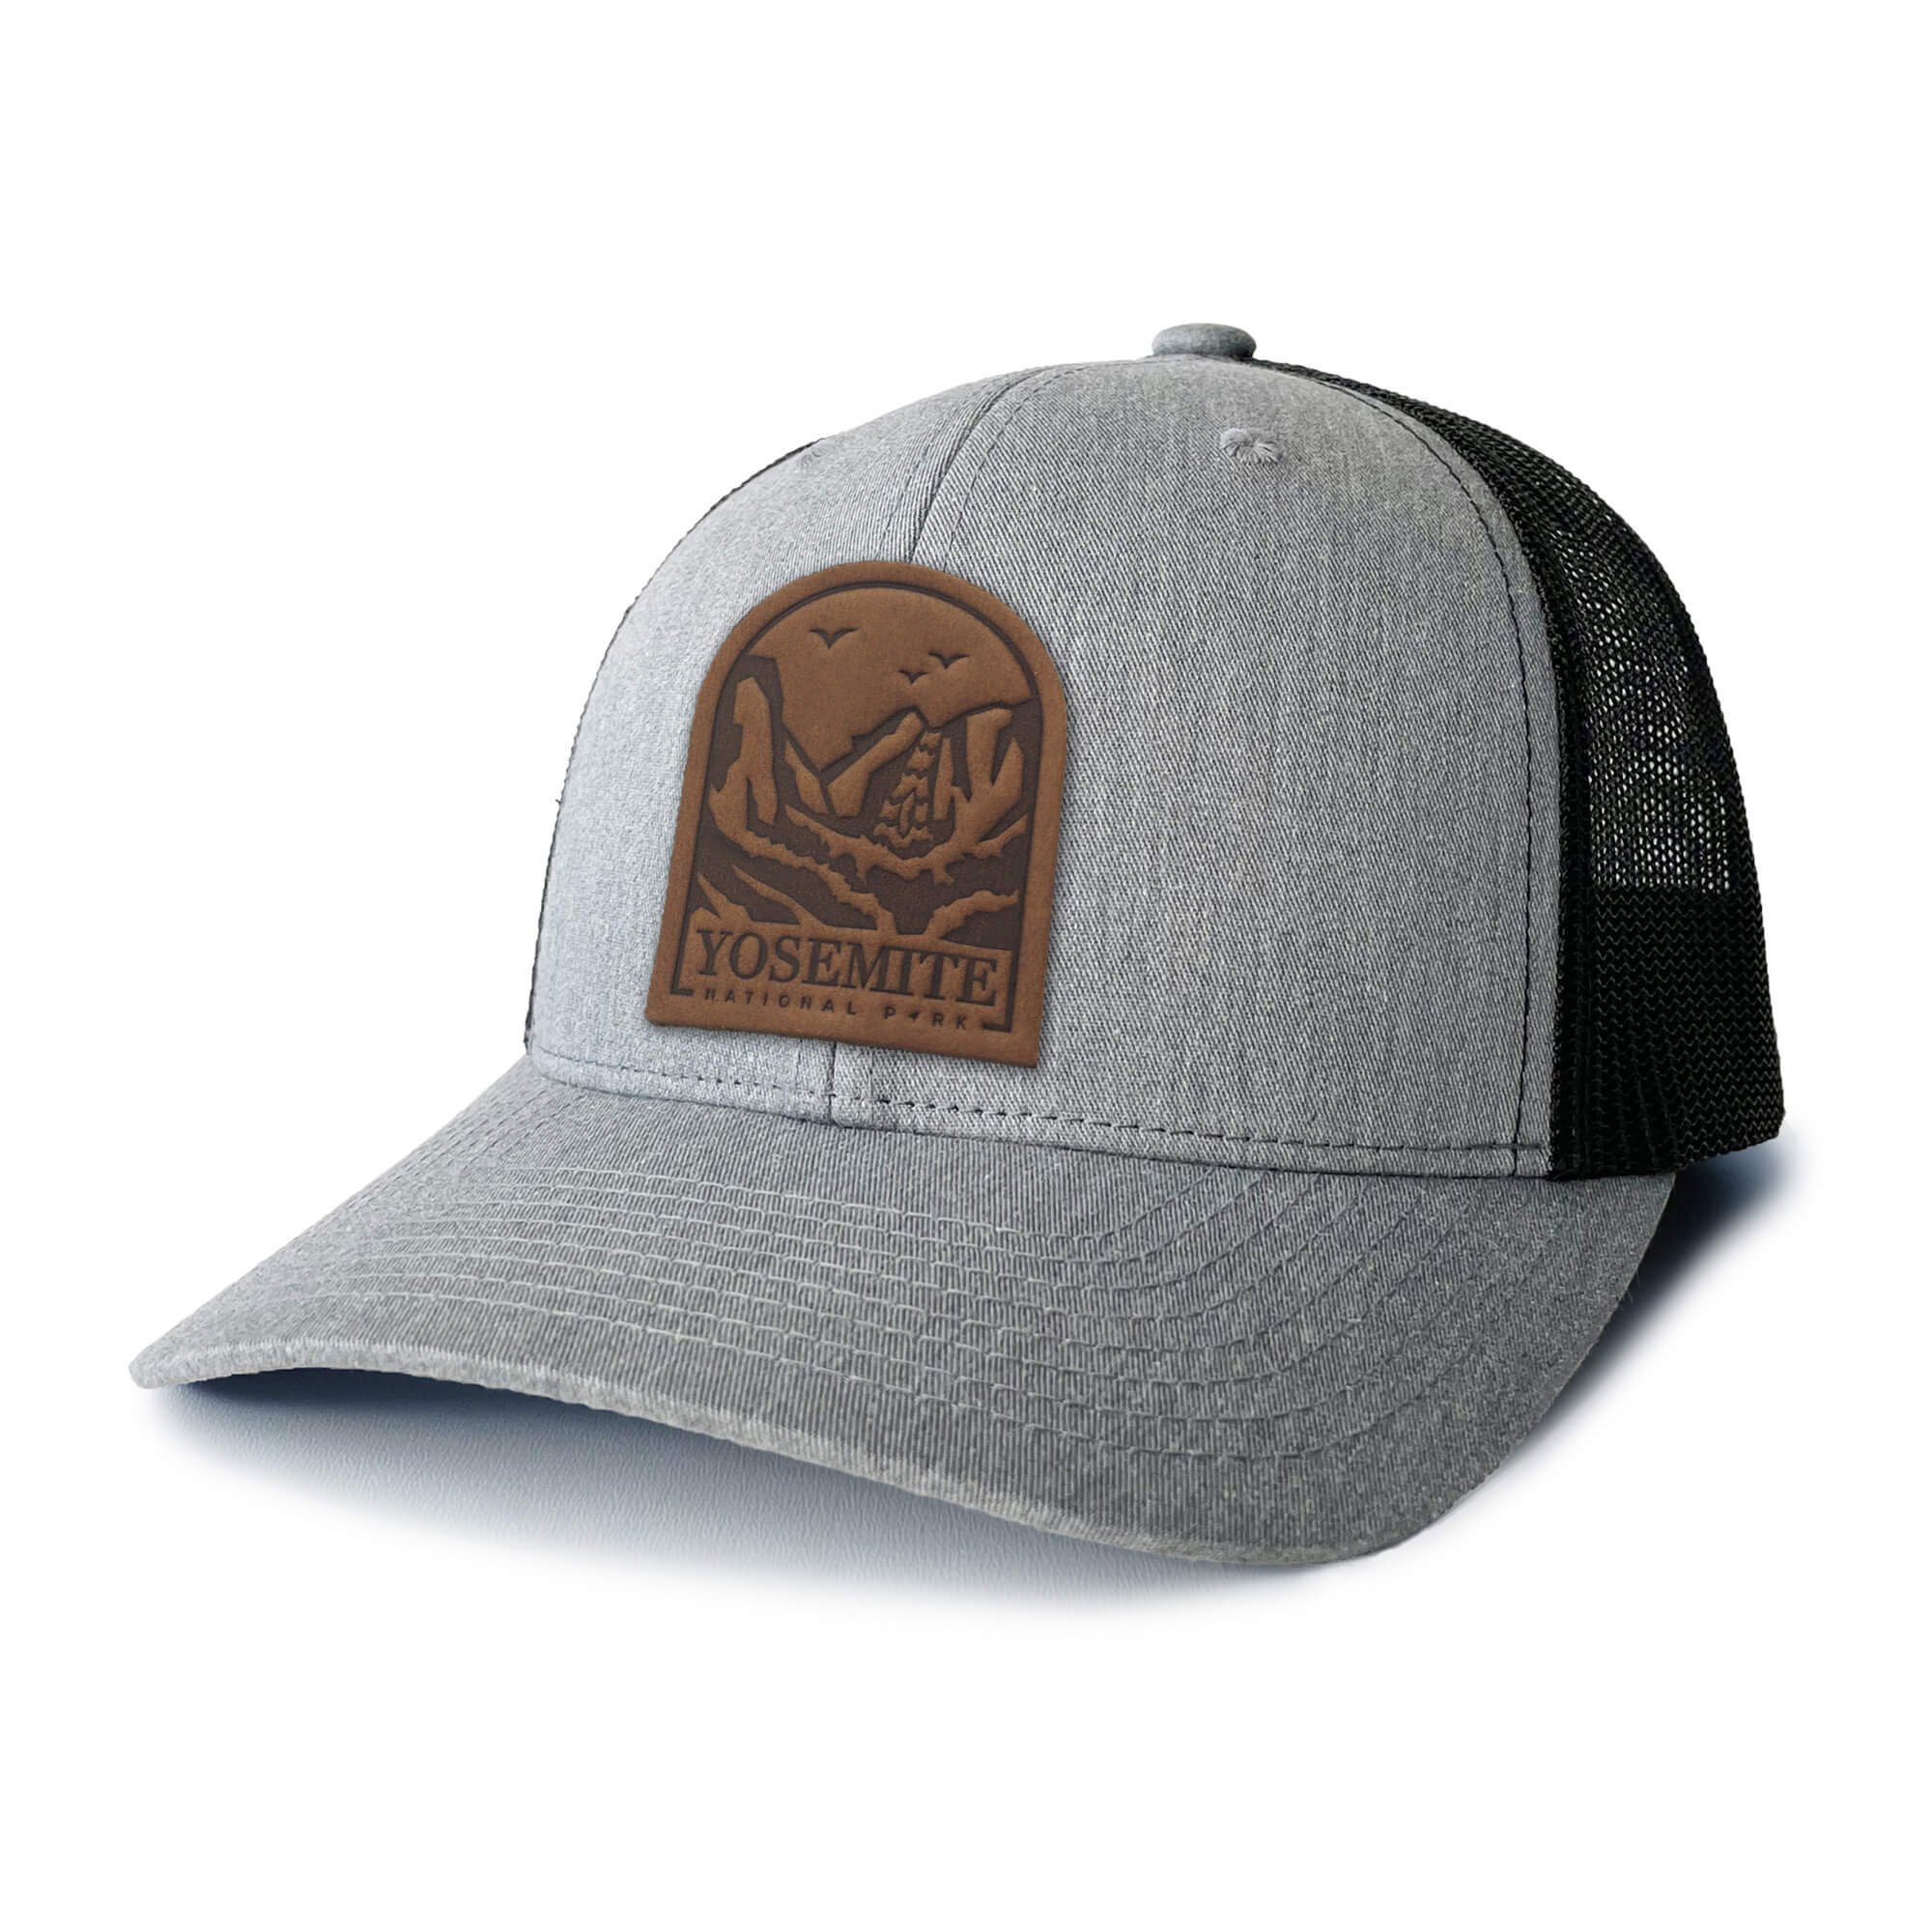 Heather grey and white trucker hat with full-grain leather patch of Yosemite National Park | BLACK-007-002, CHARC-007-002, NAVY-007-002, HGREY-007-002, MOSS-007-002, BROWN-007-002